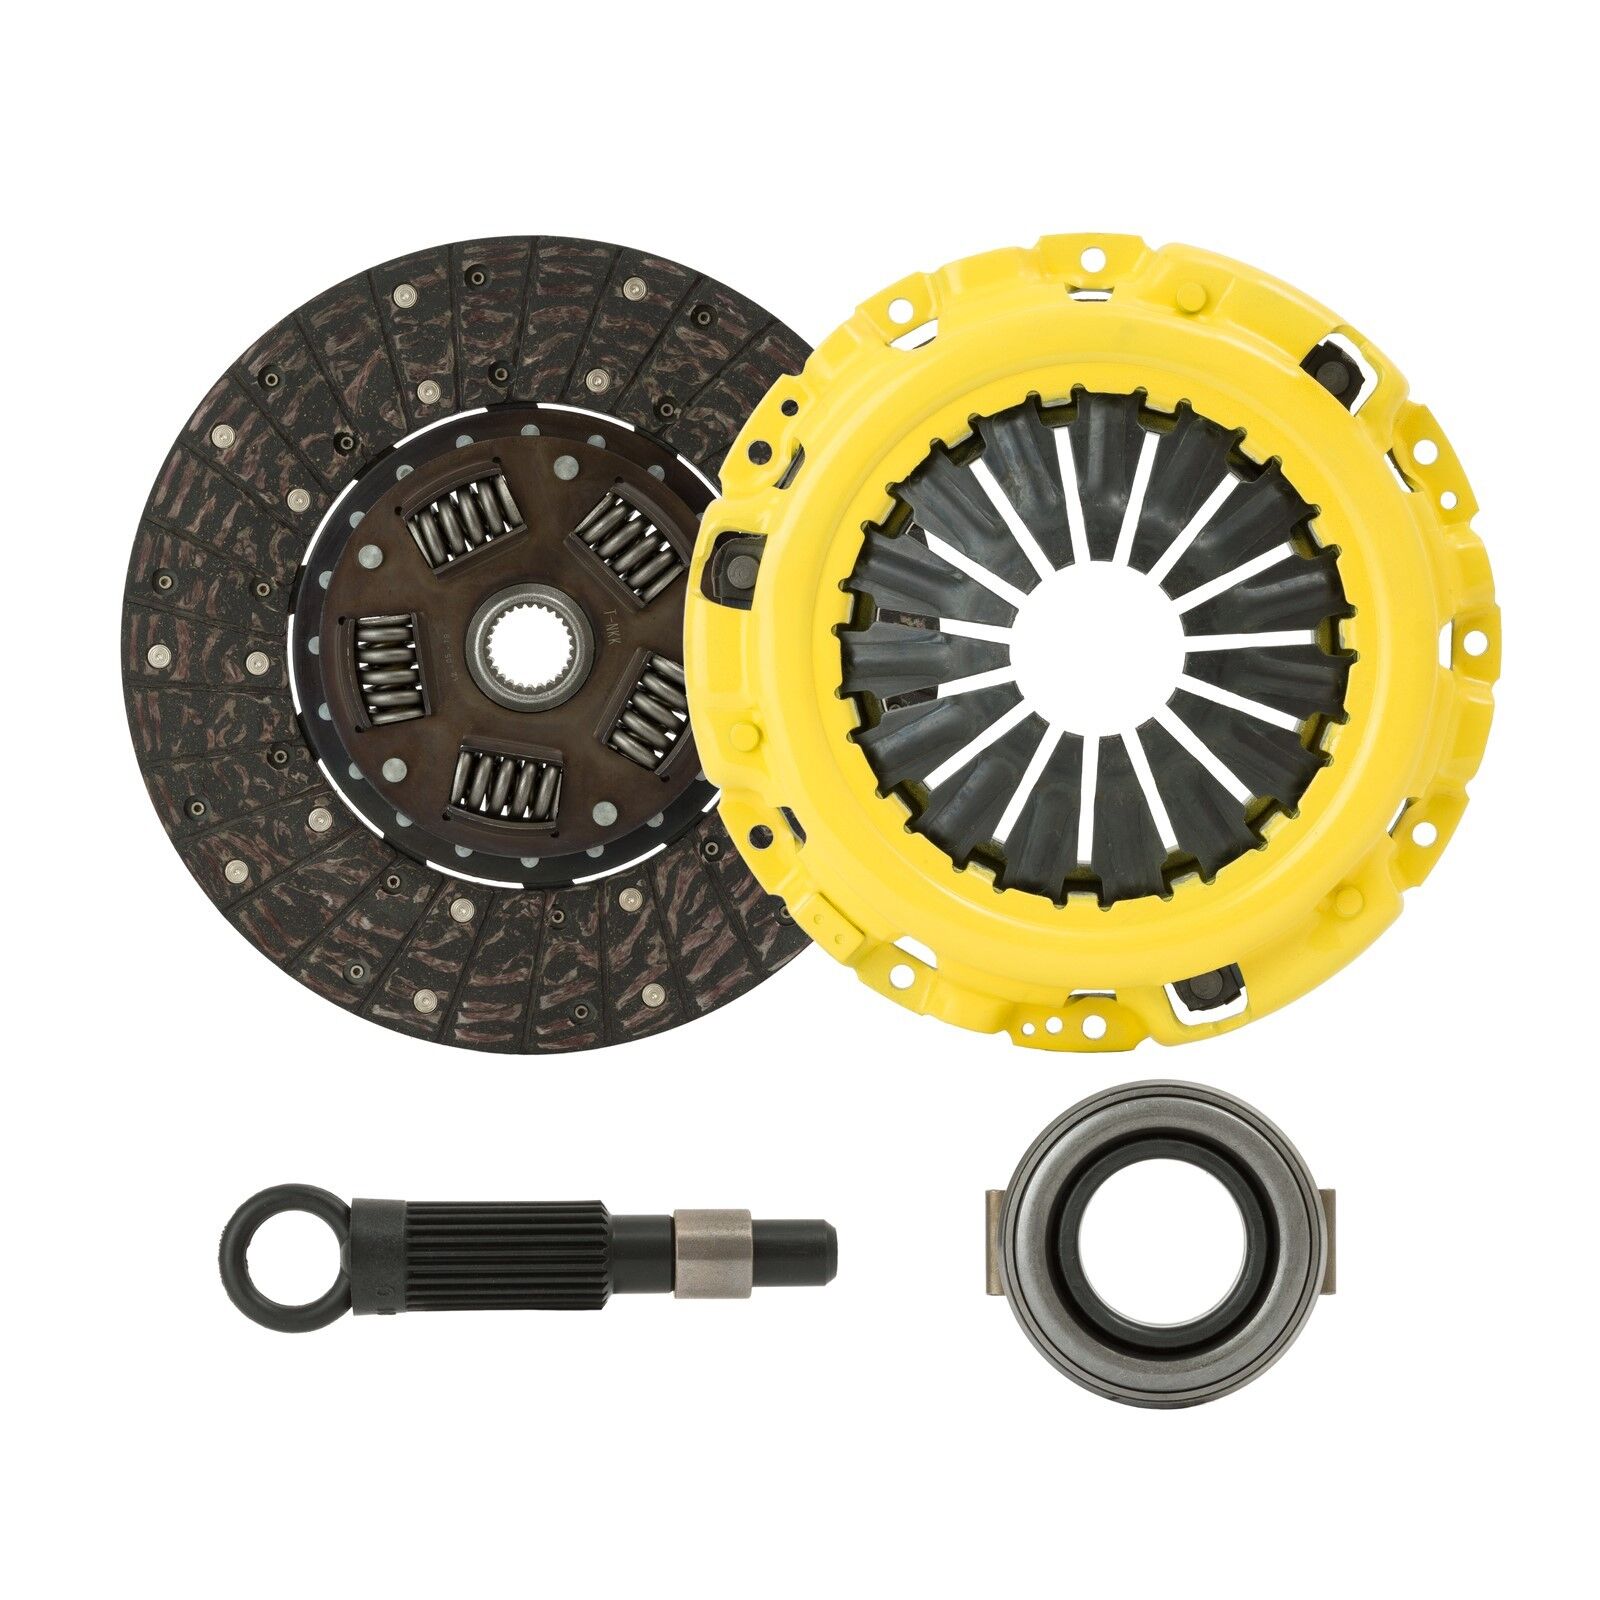 CLUTCHXPERTS STAGE 1 RACING CLUTCH KIT fits 1996-2000 TOYOTA STARLET 1.3L 4EFE